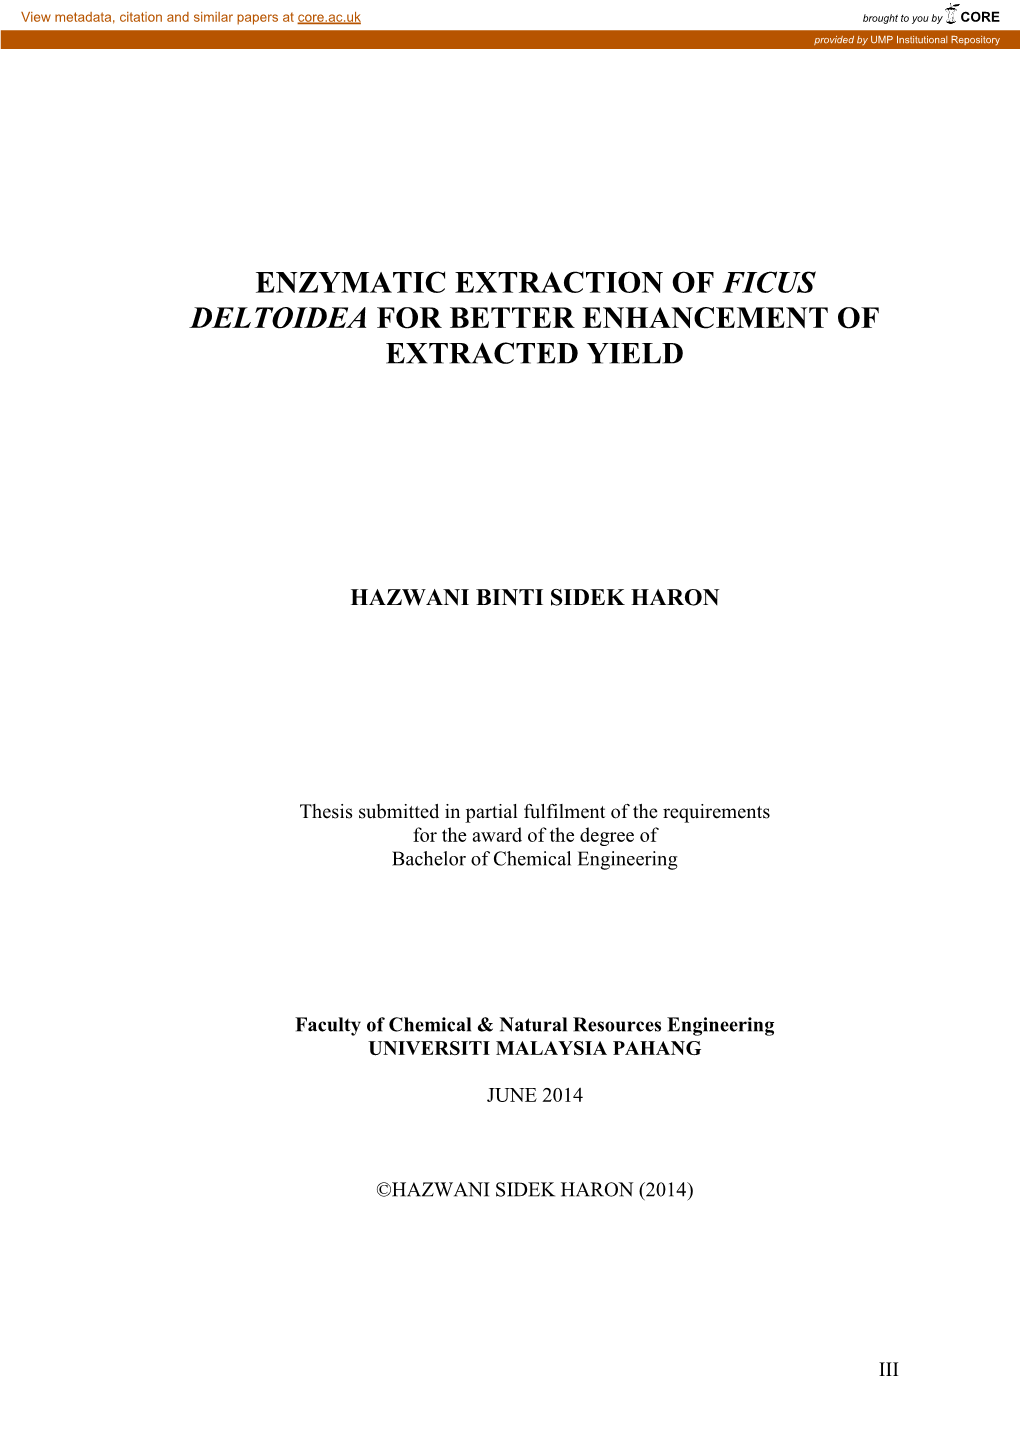 Enzymatic Extraction of Ficus Deltoidea for Better Enhancement of Extracted Yield